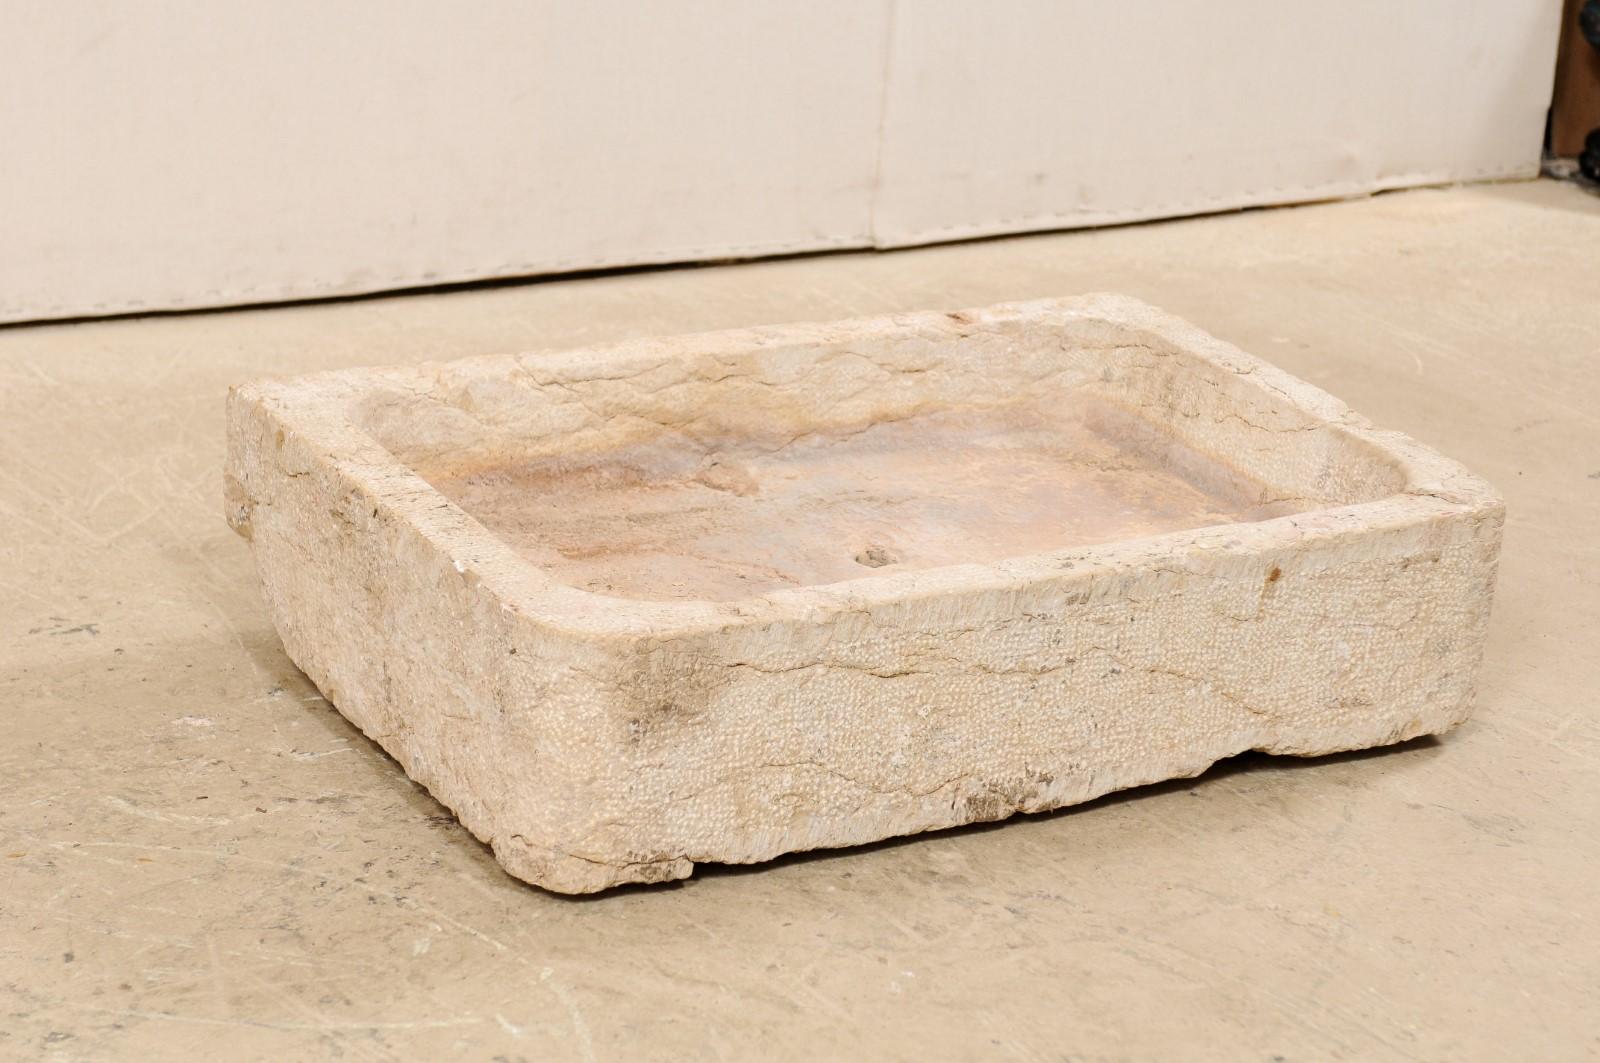 A Spanish sink with shallow basin from the 19th century, possibly older. This antique hand carved limestone sink from Spain has an overall rectangular-shape, which houses a shallow, rectangular basin within, with softly rounded corners. There is a